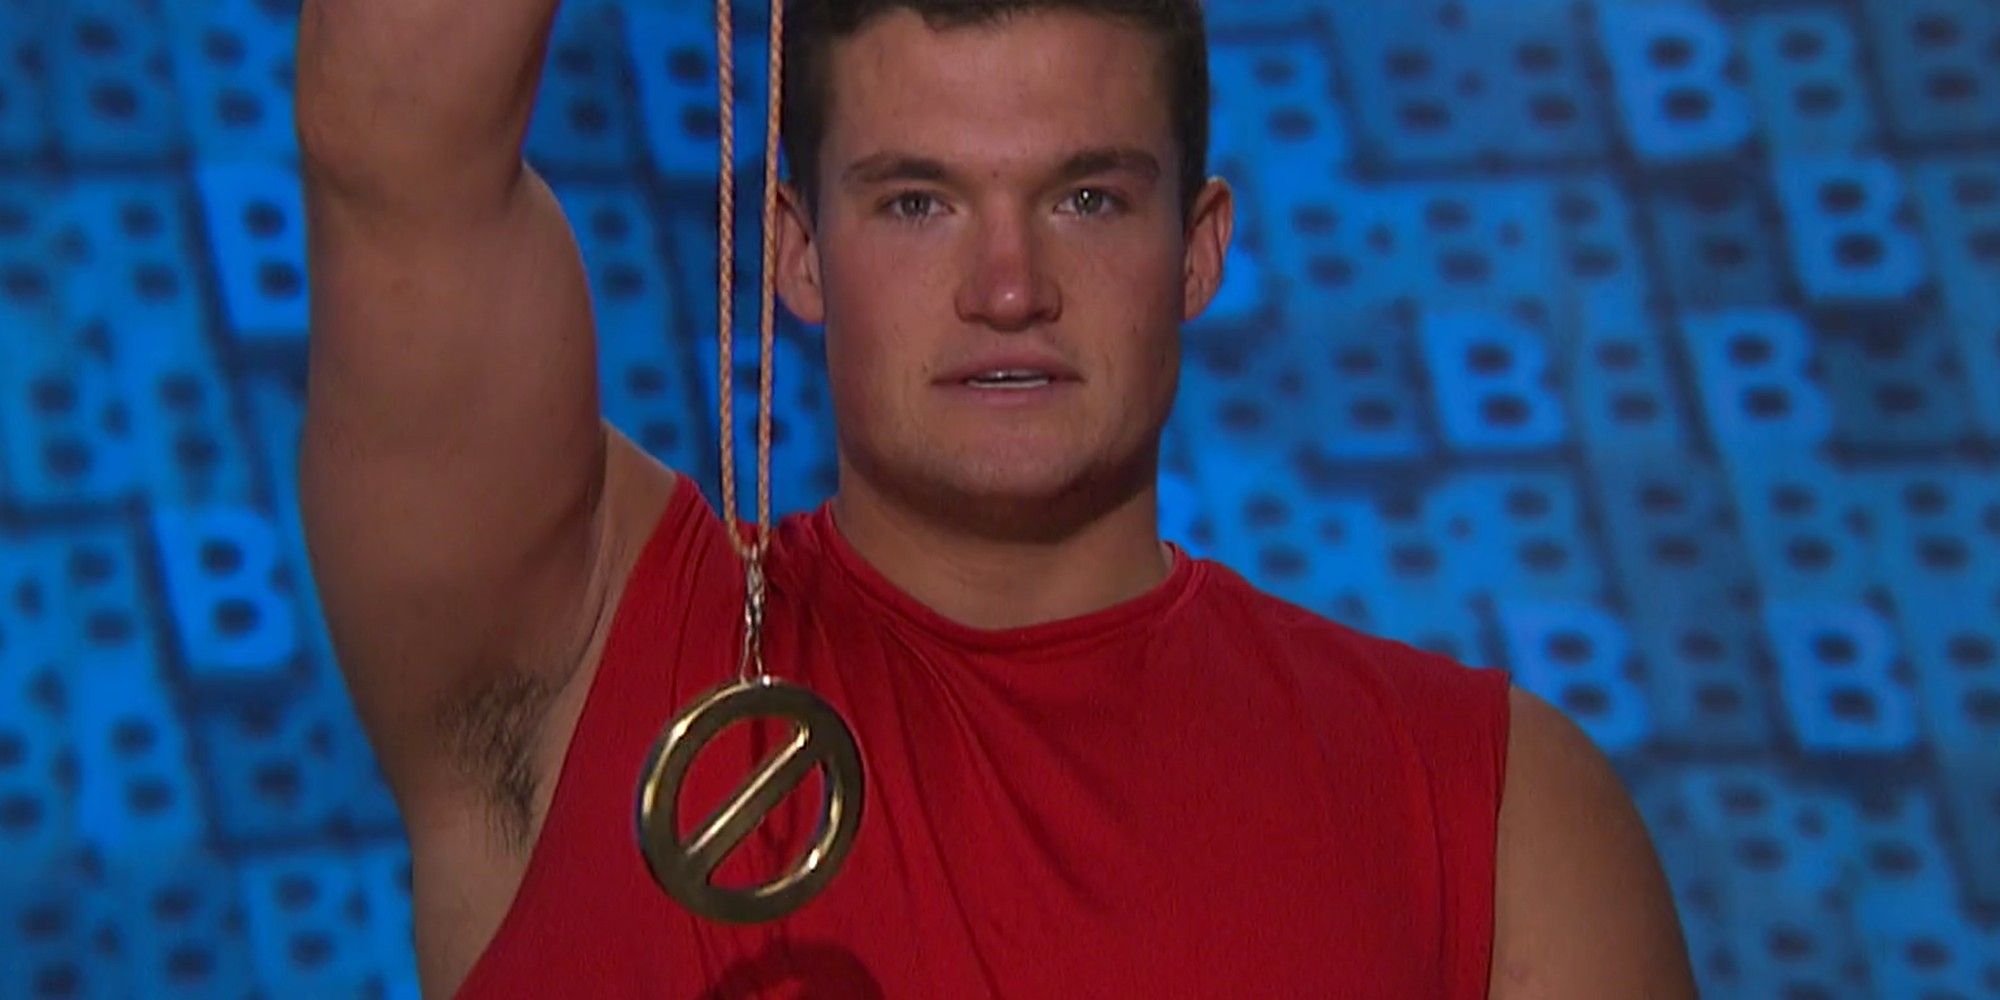 Jackson shows off Power Of Veto win in Big Brother